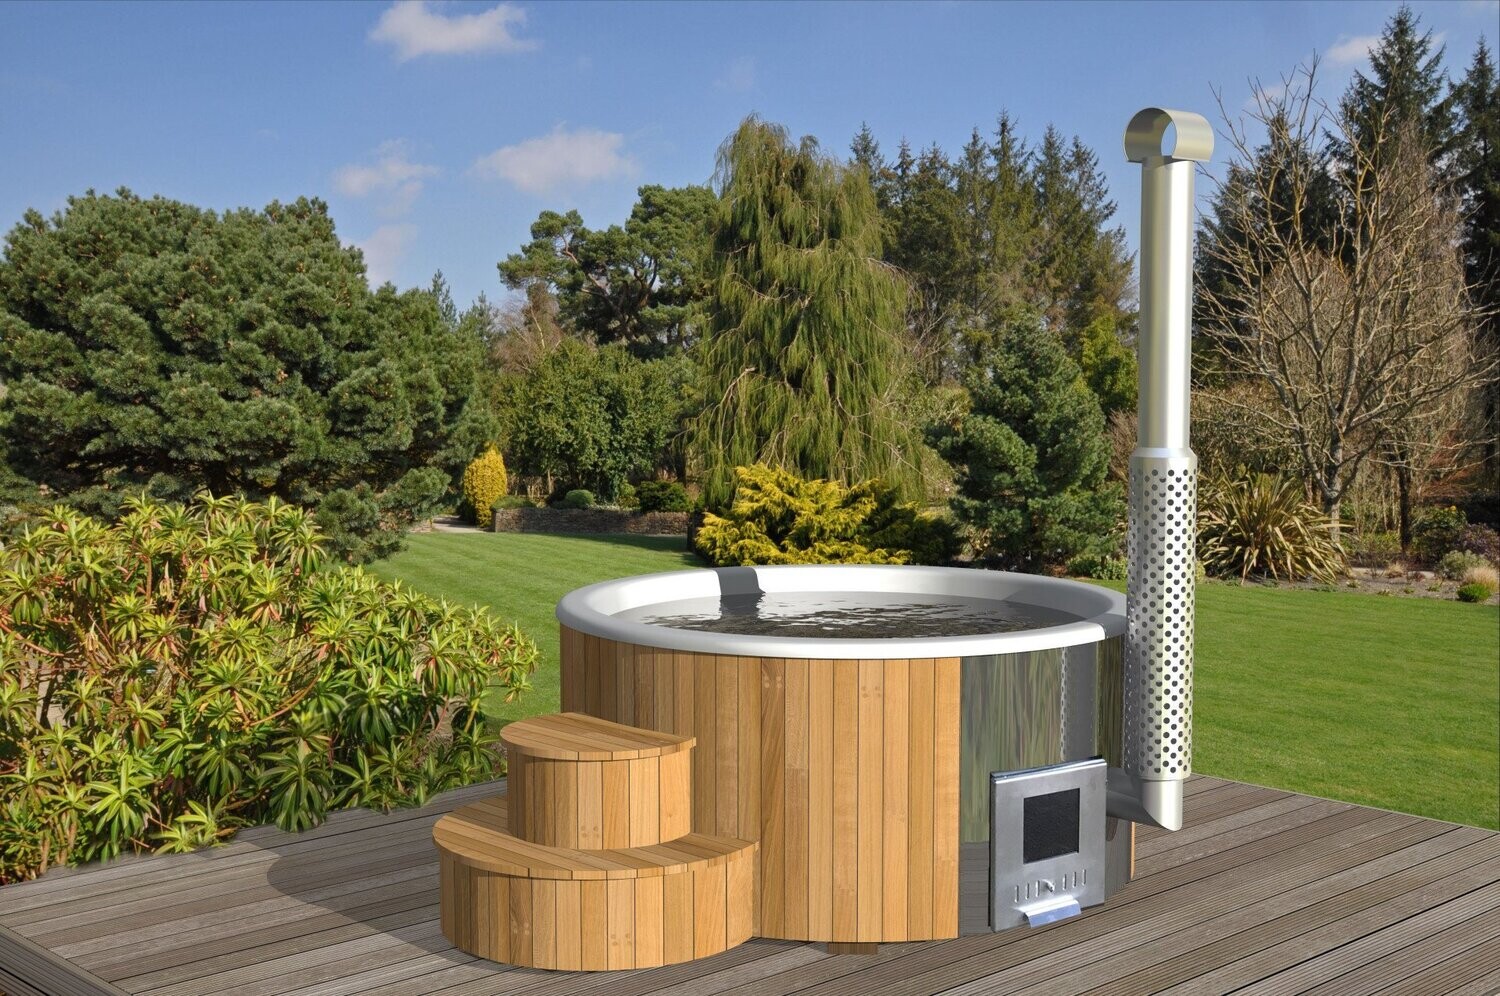 Deluxe Hot Tub 200 | Glamping Pods For Sale